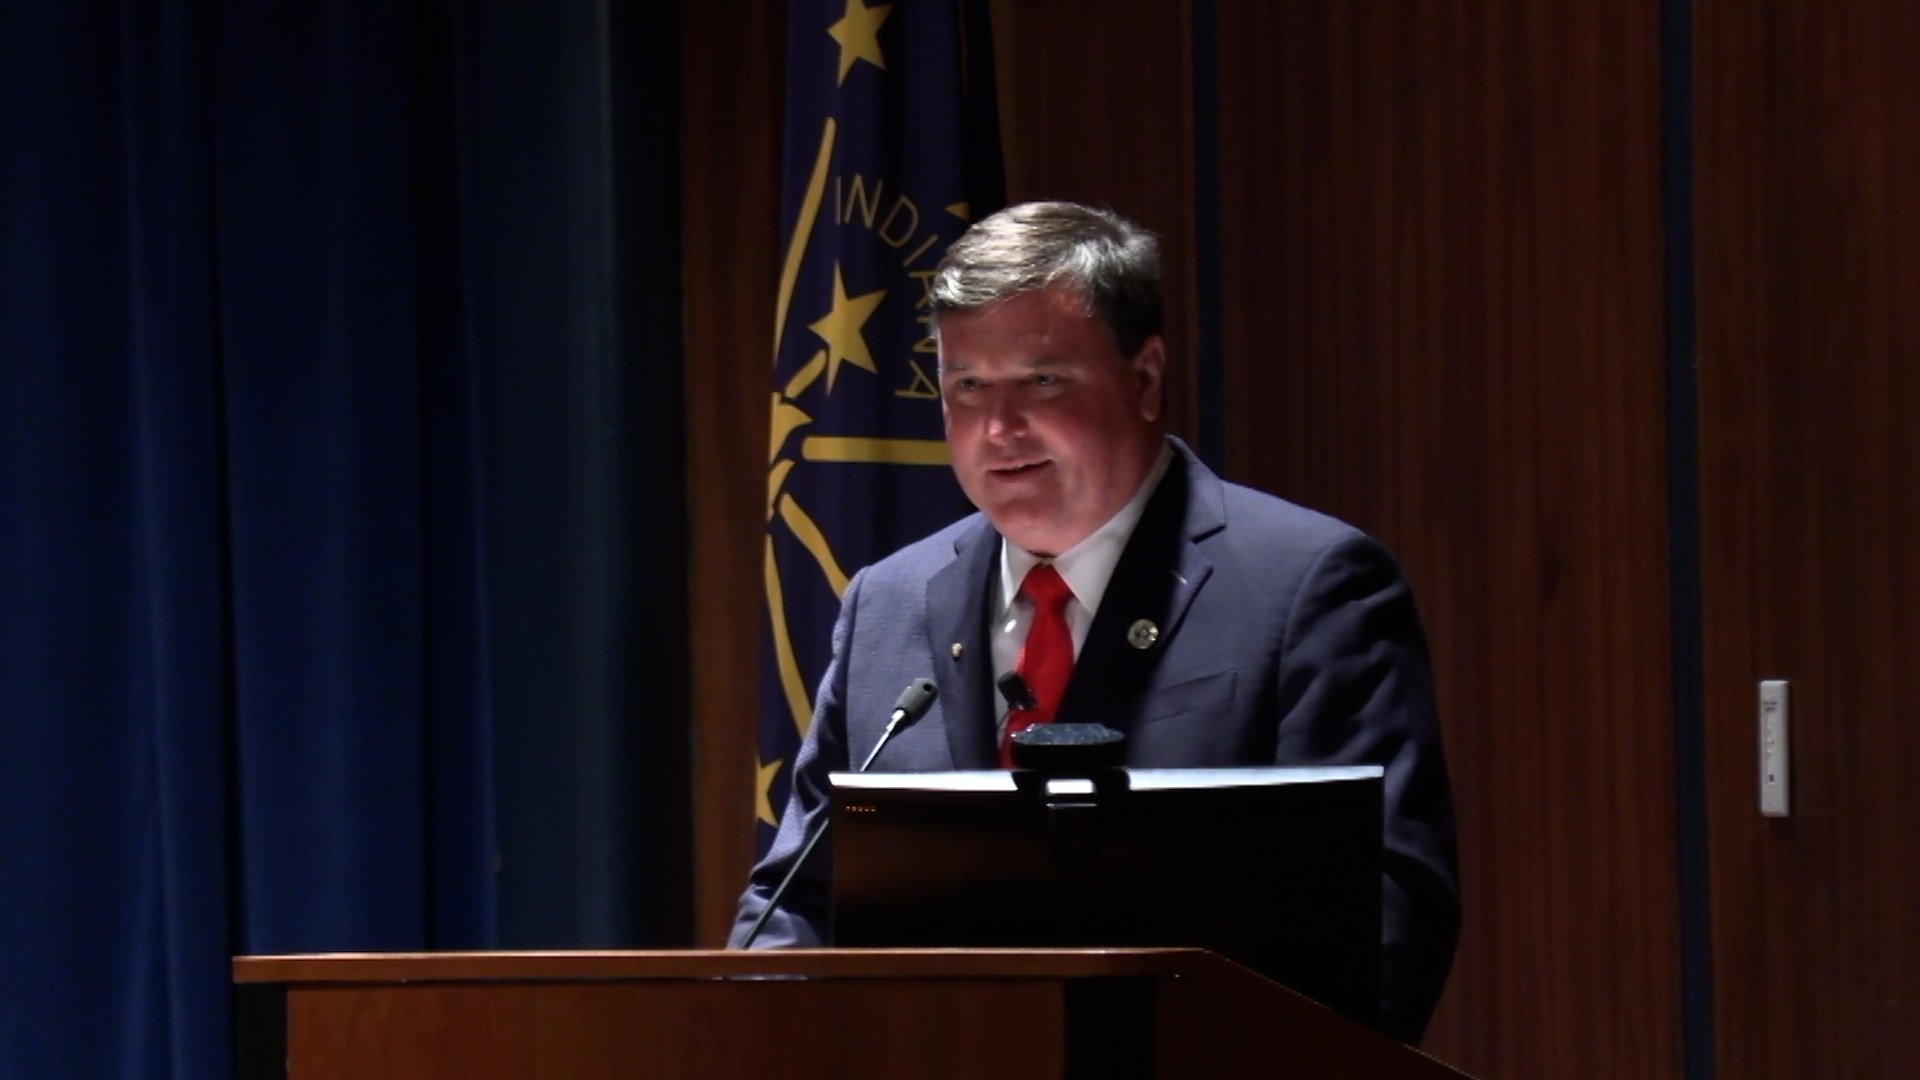 Indiana Attorney General Todd Rokita facing misconduct charges from state commission